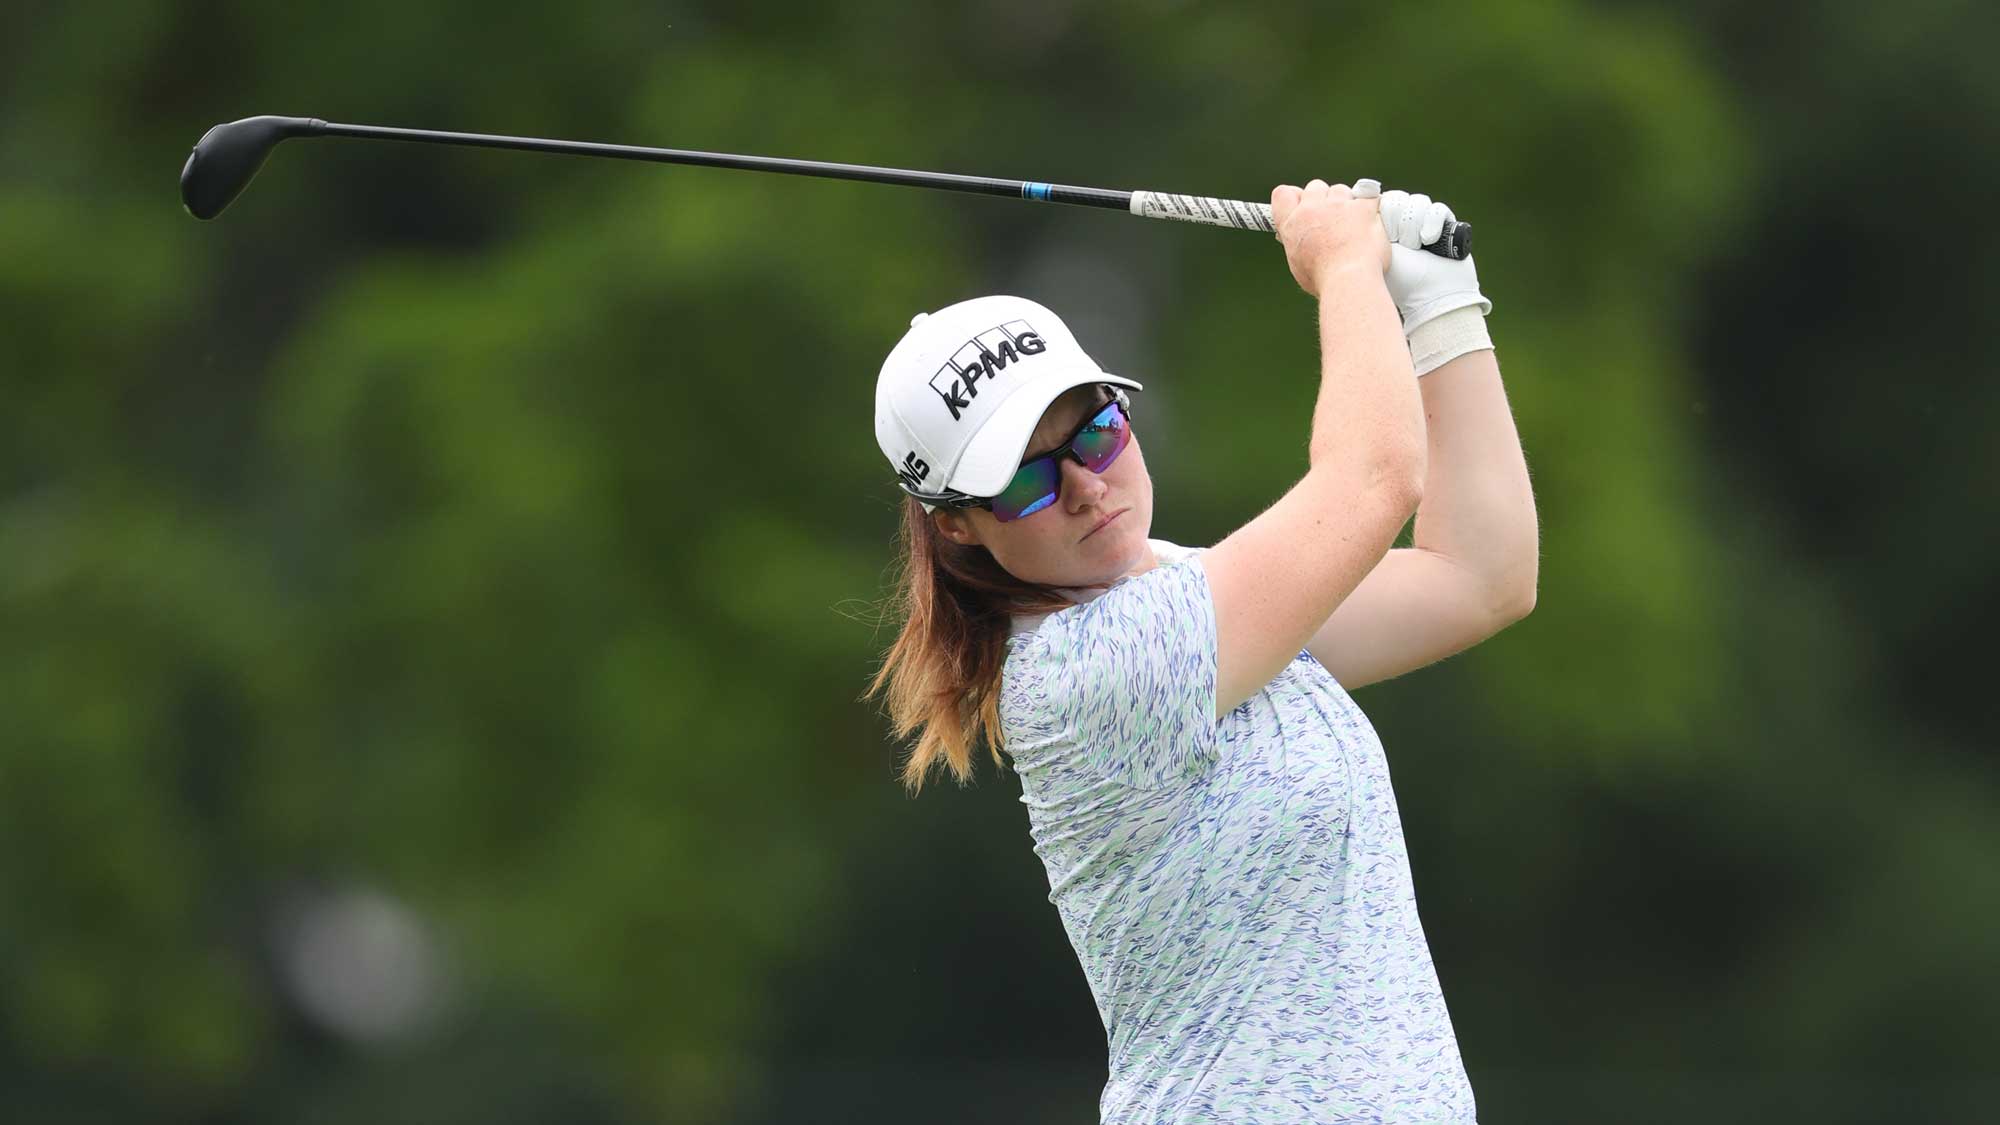 Maguire retains 1-shot lead in Women's PGA Championship with Jenny